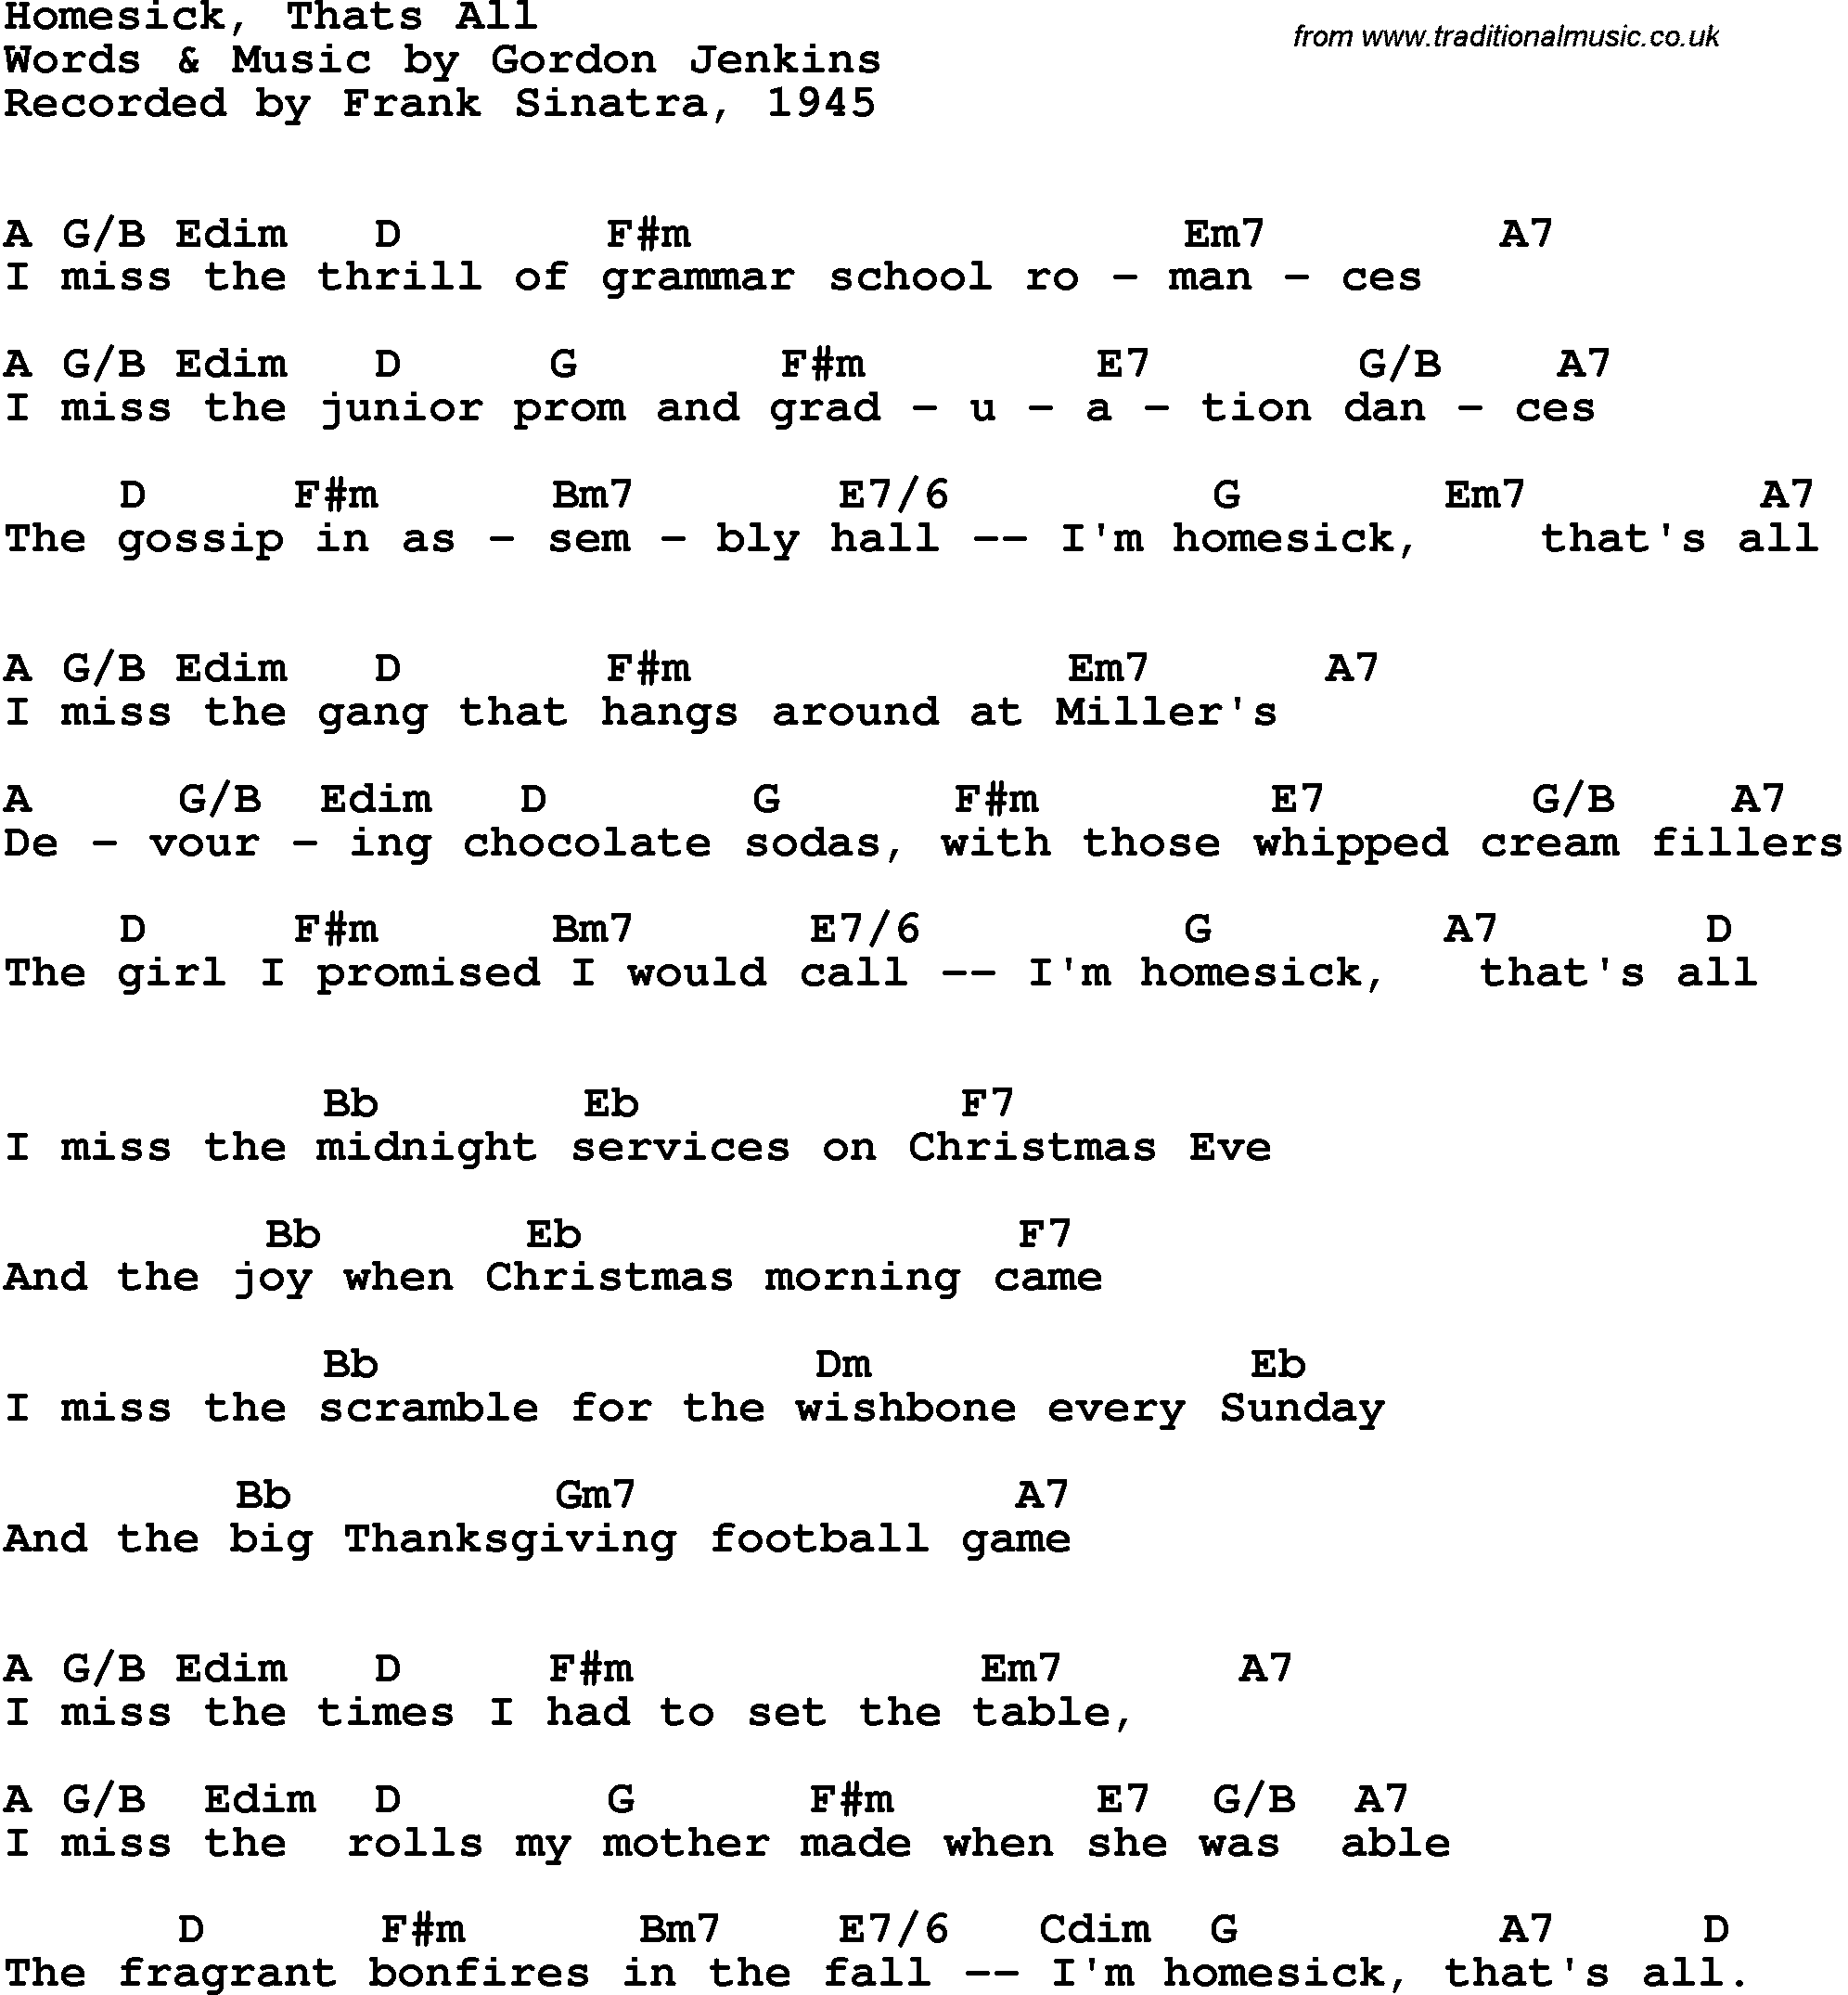 Song Lyrics with guitar chords for Homesick That's All - Frank Sinatra, 1945